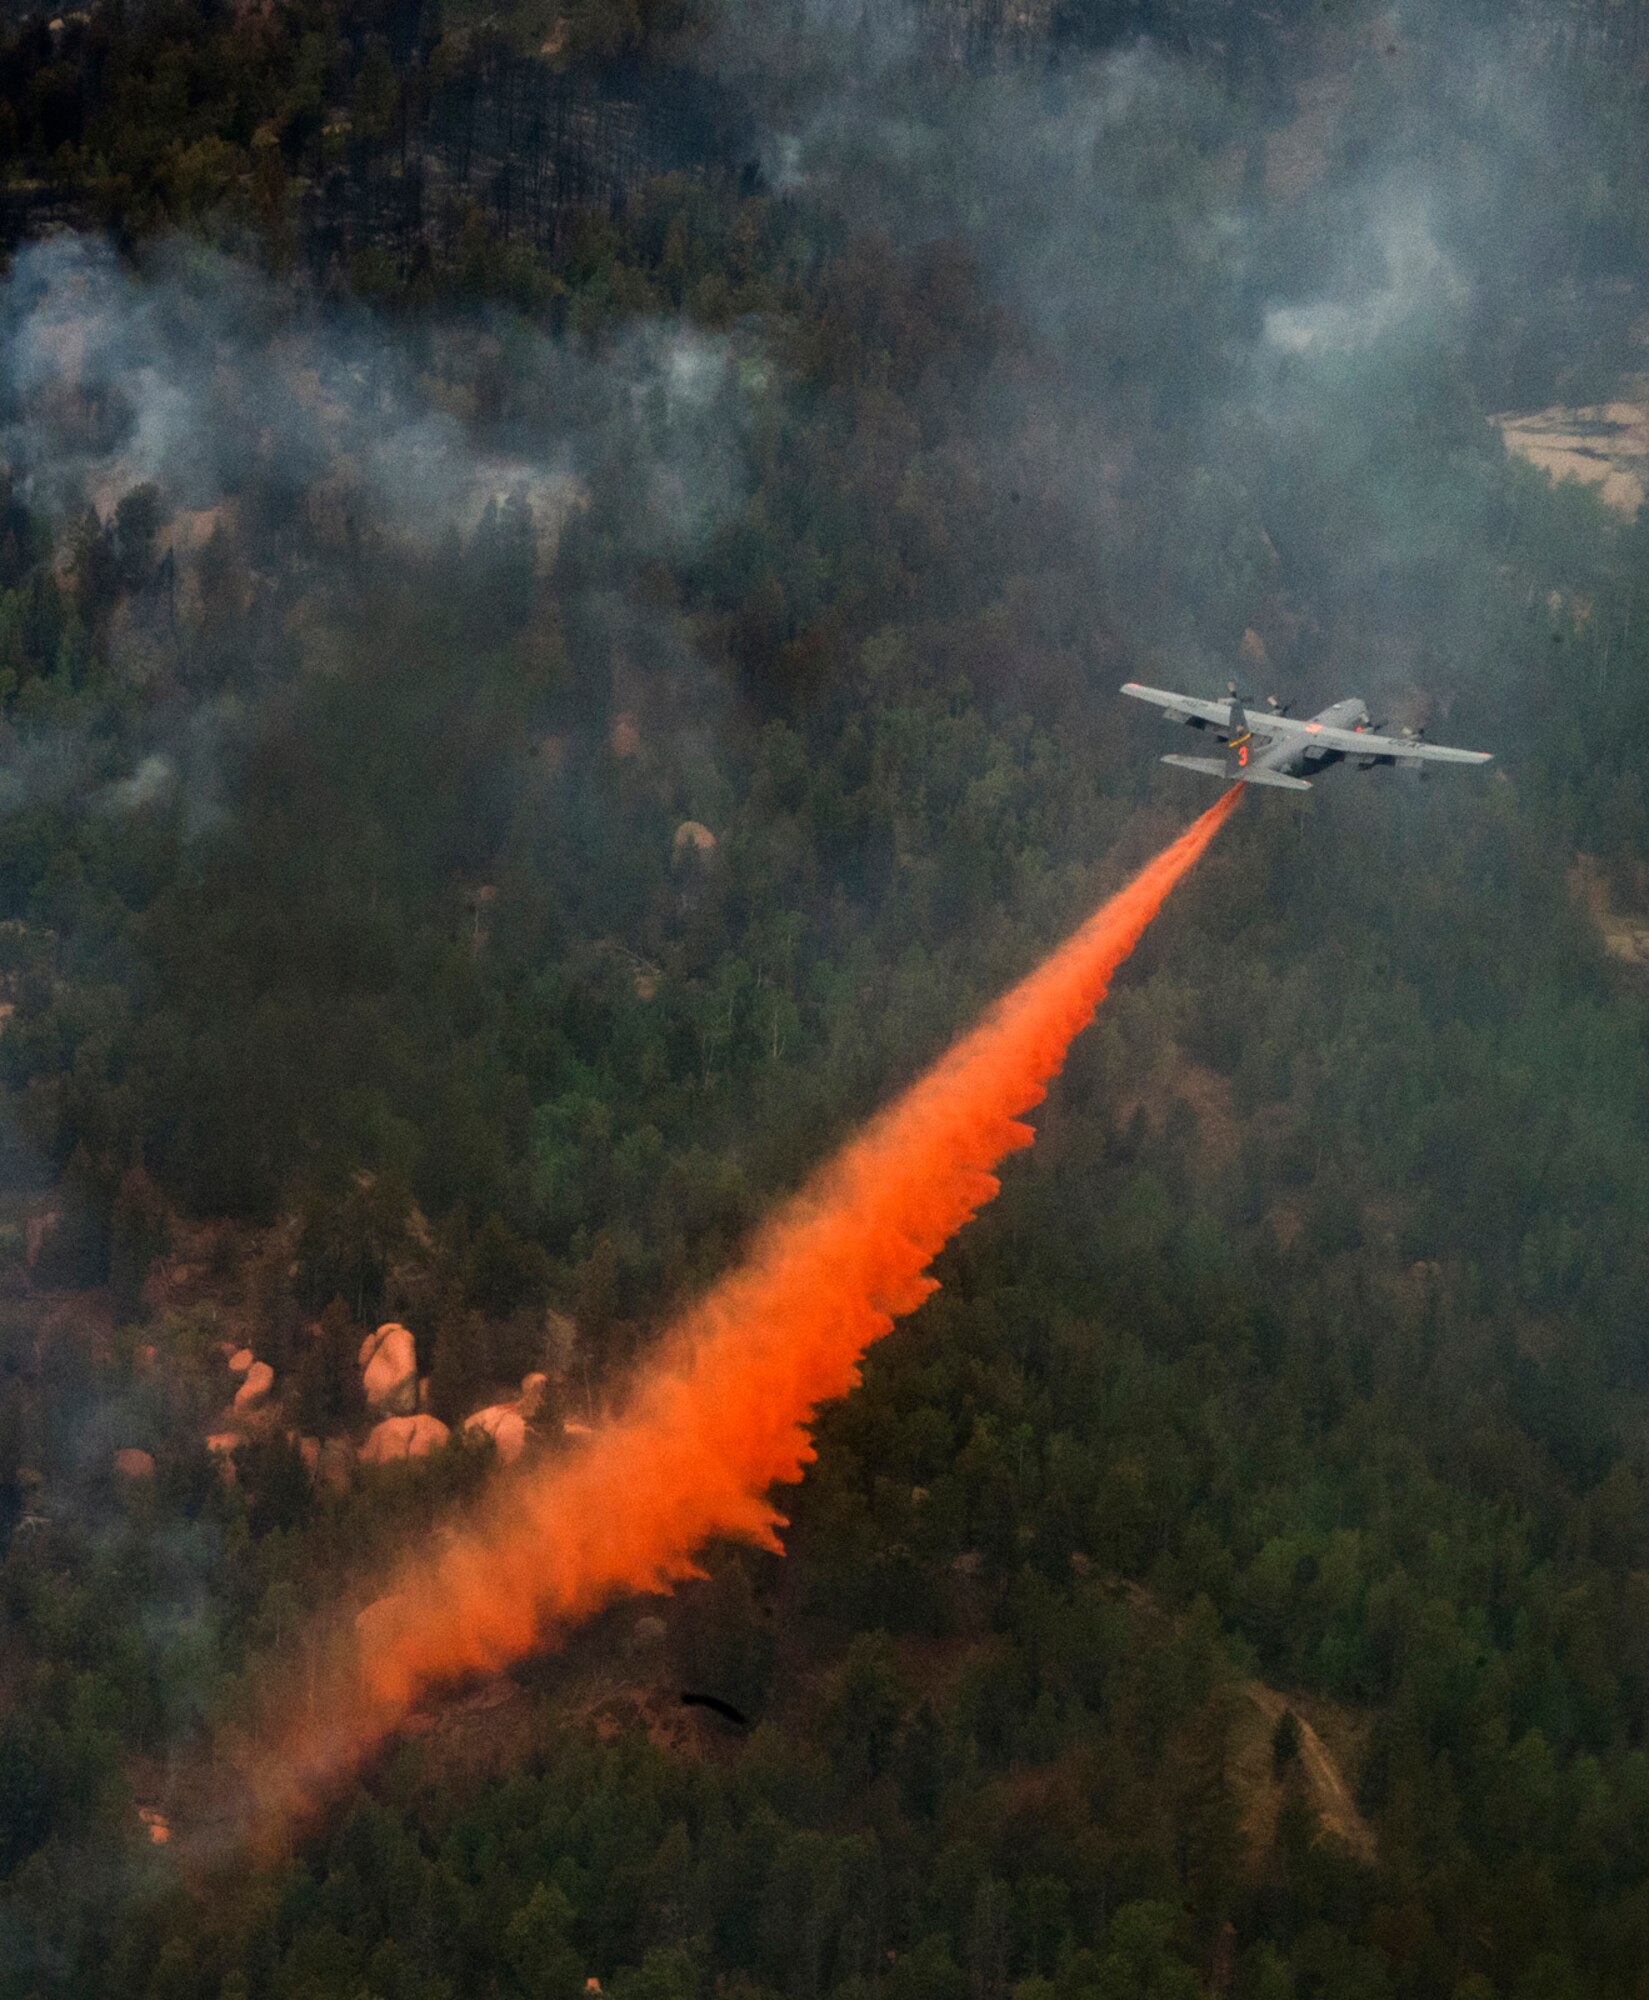 The 153rd Airlift Wing from Cheyenne WY use a modular air fire fighting system equipped C-130 Hercules aircraft in support of the Waldo Canyon wild fire in Colorado Springs, CO on June 27, 2012.  Four MAFFS-equipped aircraft from the 302nd and 153rd Airlift Wings flew in support of the U.S. Forest Service as they fought fires in Colorado.  MAFFS is a self-contained aerial fire fighting system that can discharge 3,000 gallons of water or fire retardant in less than five seconds, covering an area one-quarter of a mile long by 100 feet wide.
 (U.S. Air Force photo/Staff Sgt. Stephany D. Richards)